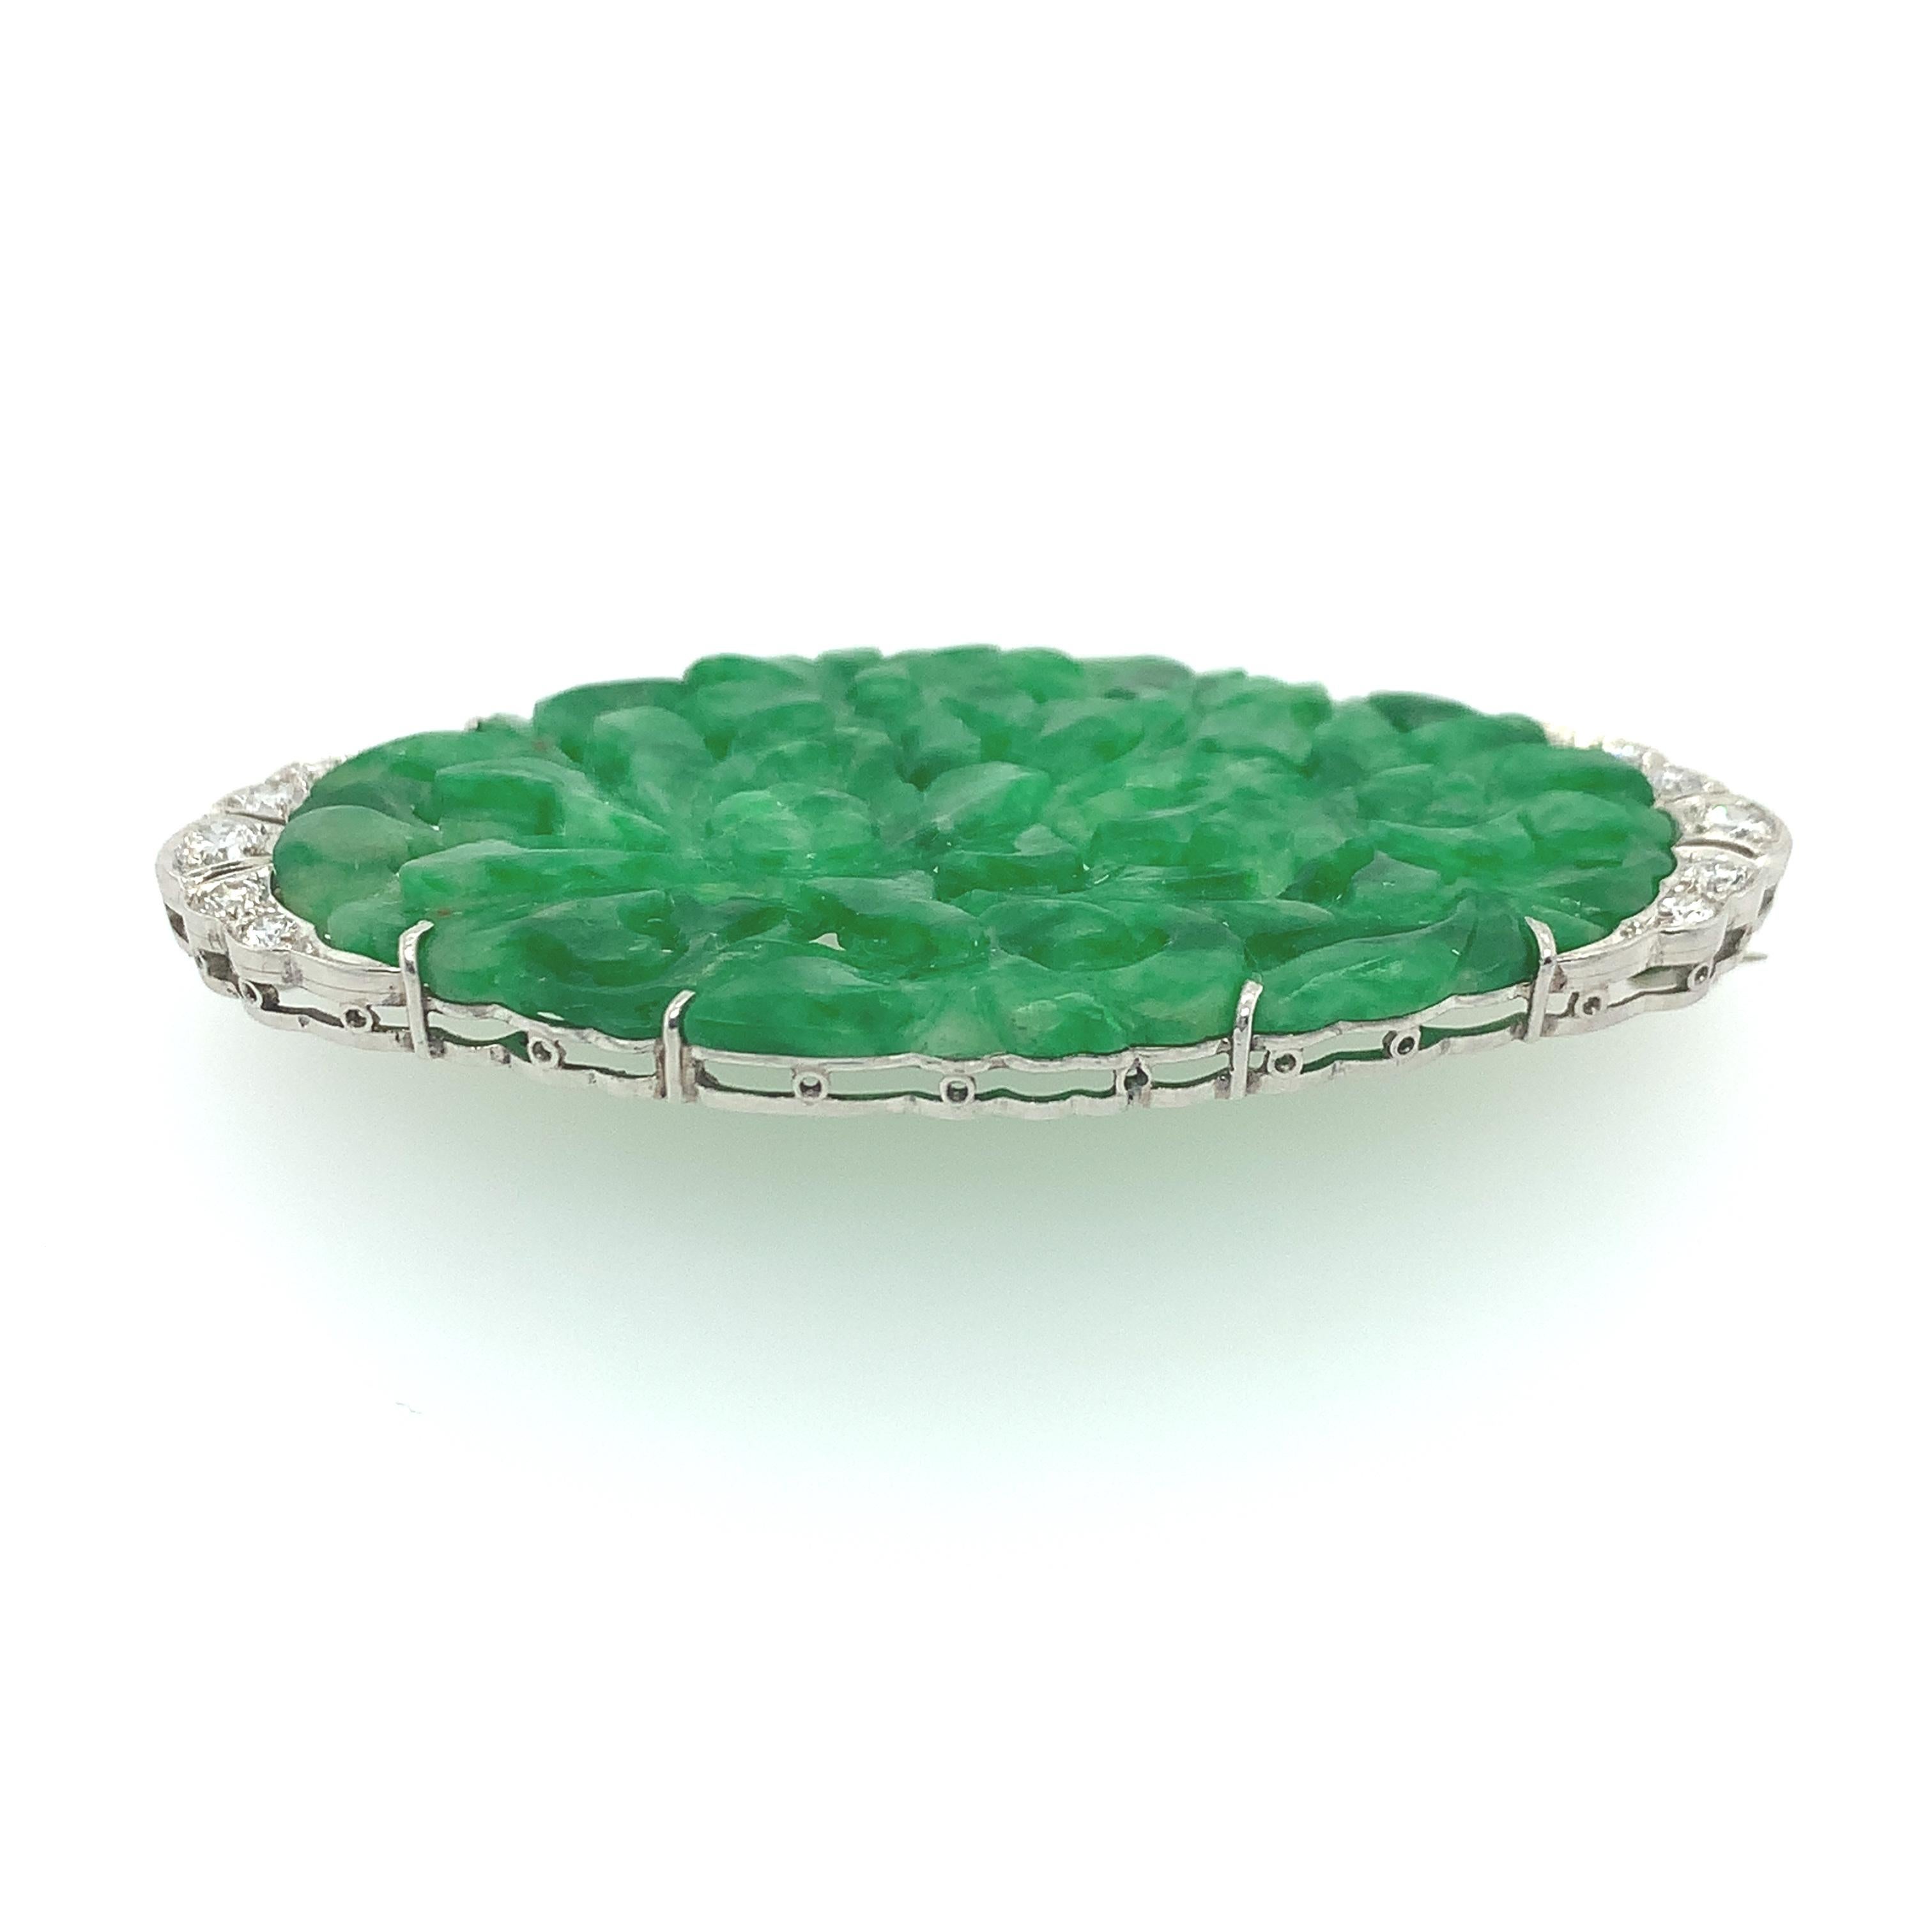 Intricately carved natural jadeite brooch with floral design accented with (10) ten total round brilliant cut near-colorless diamonds weighing approximately 0.36 carats. This glamorous translucent brooch includes a platinum frame, and its stunning